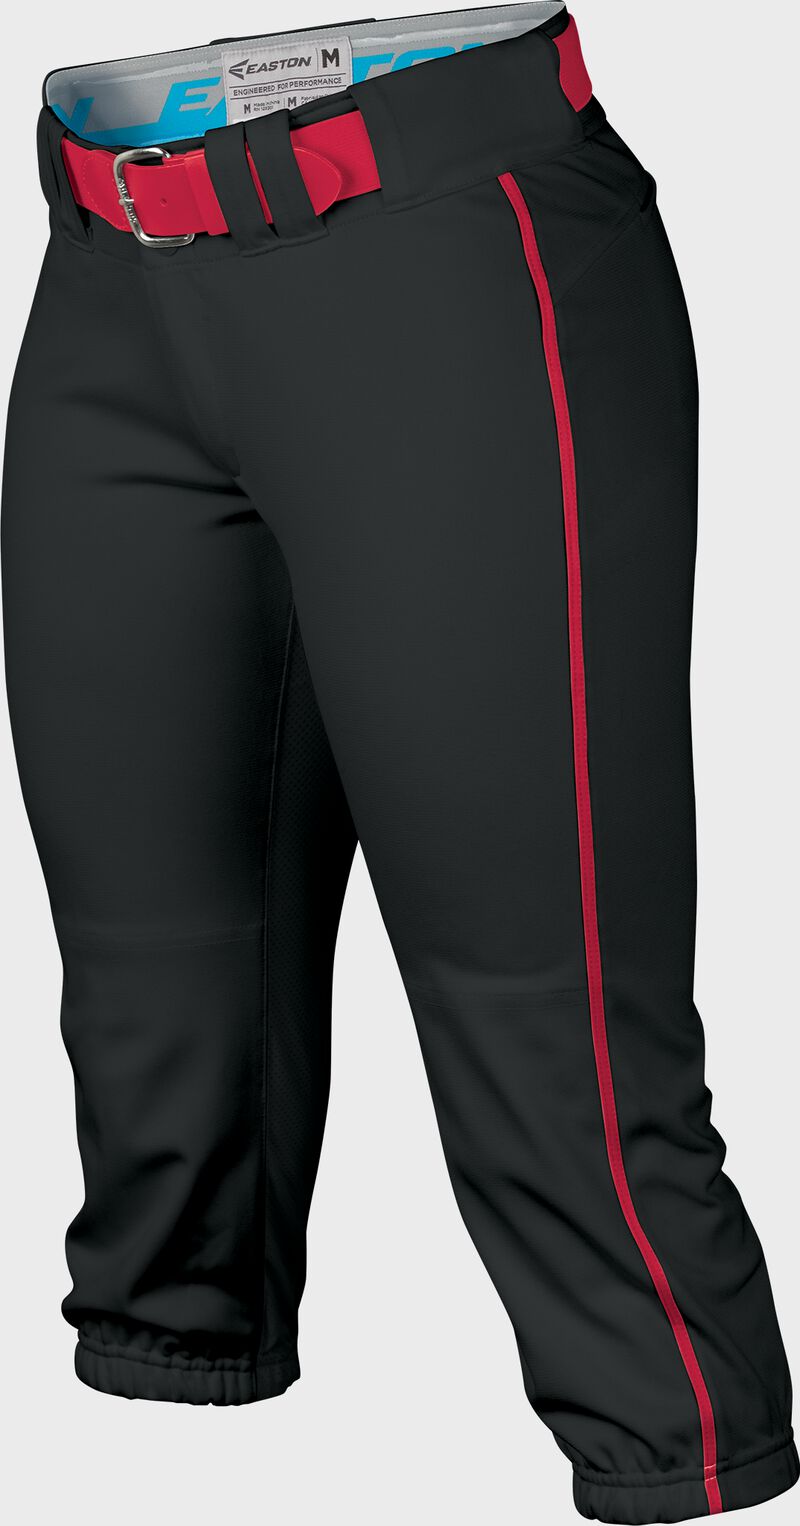 Easton Prowess Softball Pant Women's Piped BLACK/RED  XS